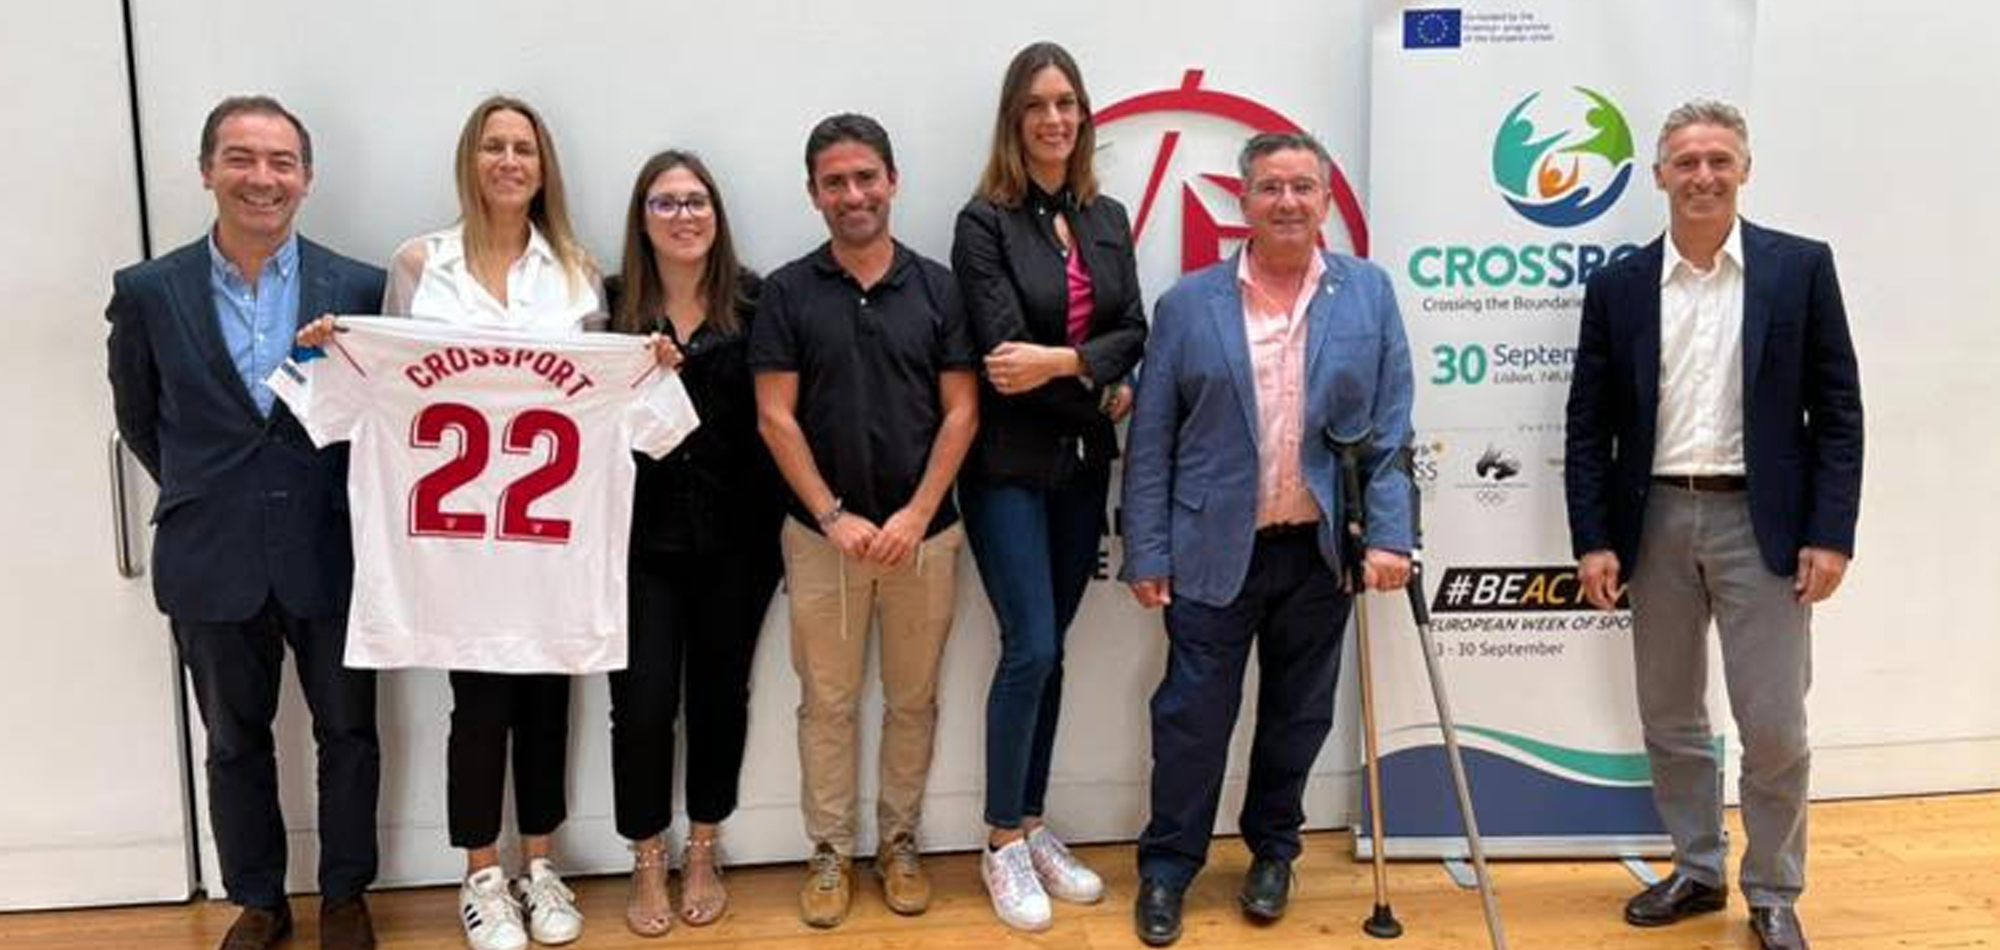 ICSS Join forces with Project Partners to launch “Crossing the Boundaries through Sport” to support young refugees in Europe